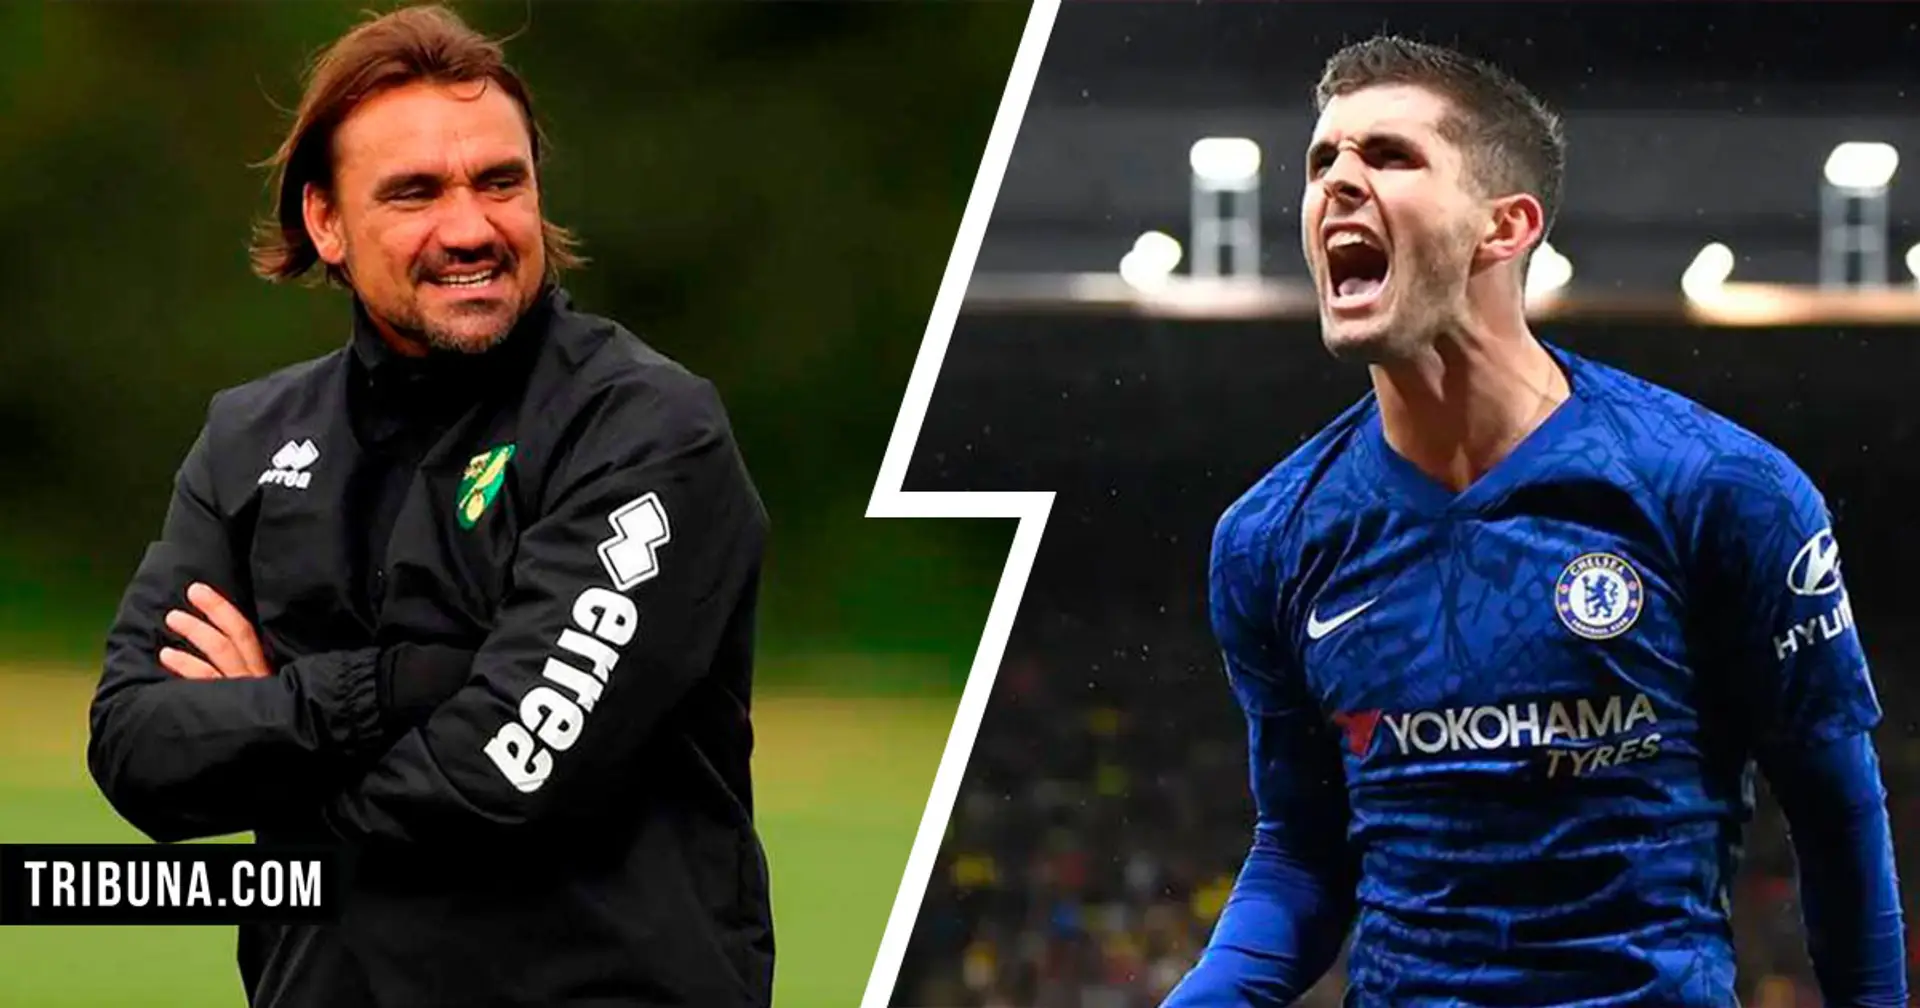 Norwich boss Farke: 'Pulisic will have bright future and will be world-class player one day'